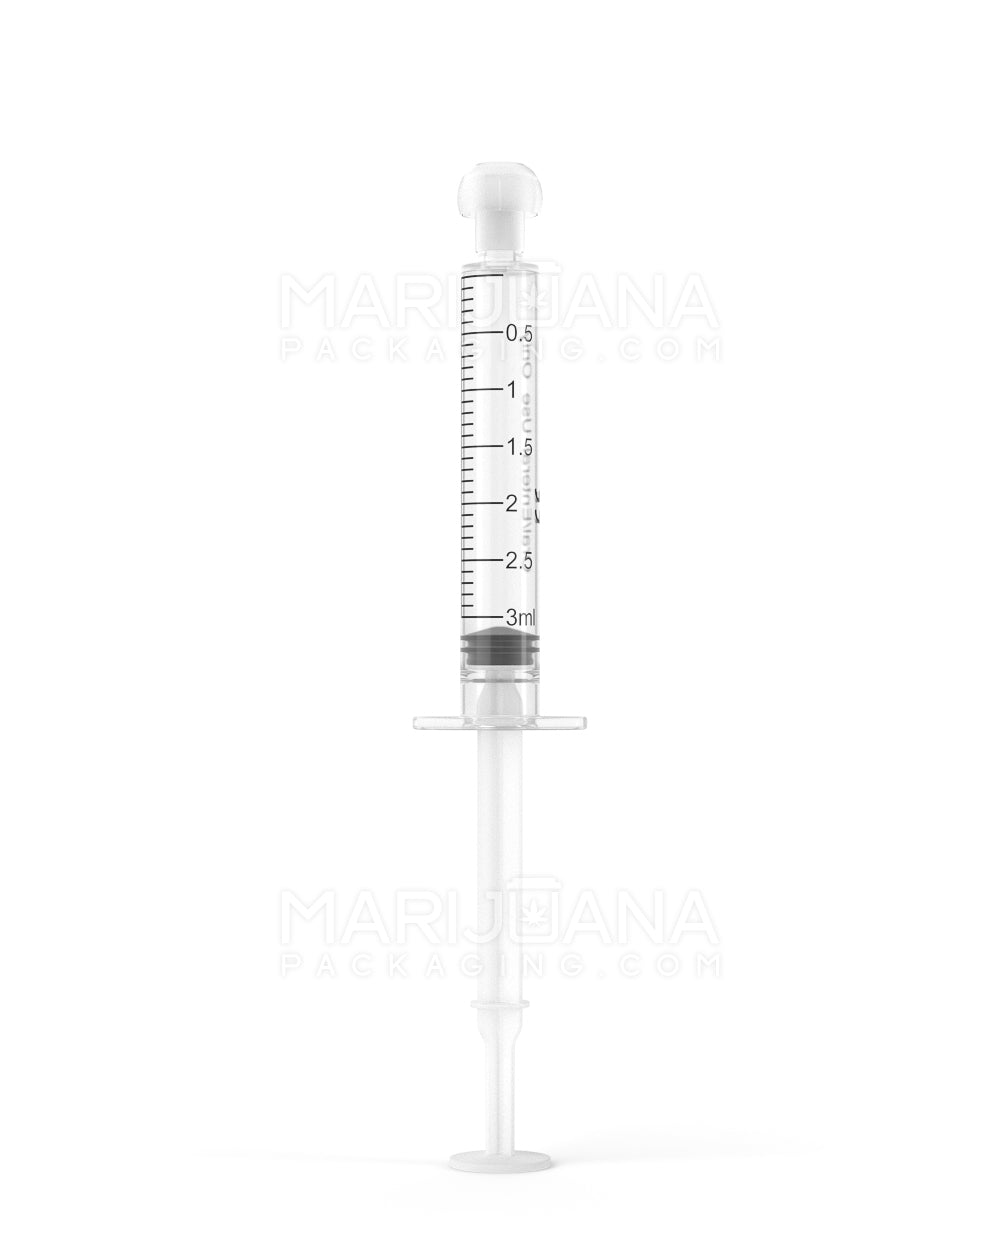 Plastic Oral Concentrate Syringes | 3mL - 0.5mL Increments - 100 Count - 1